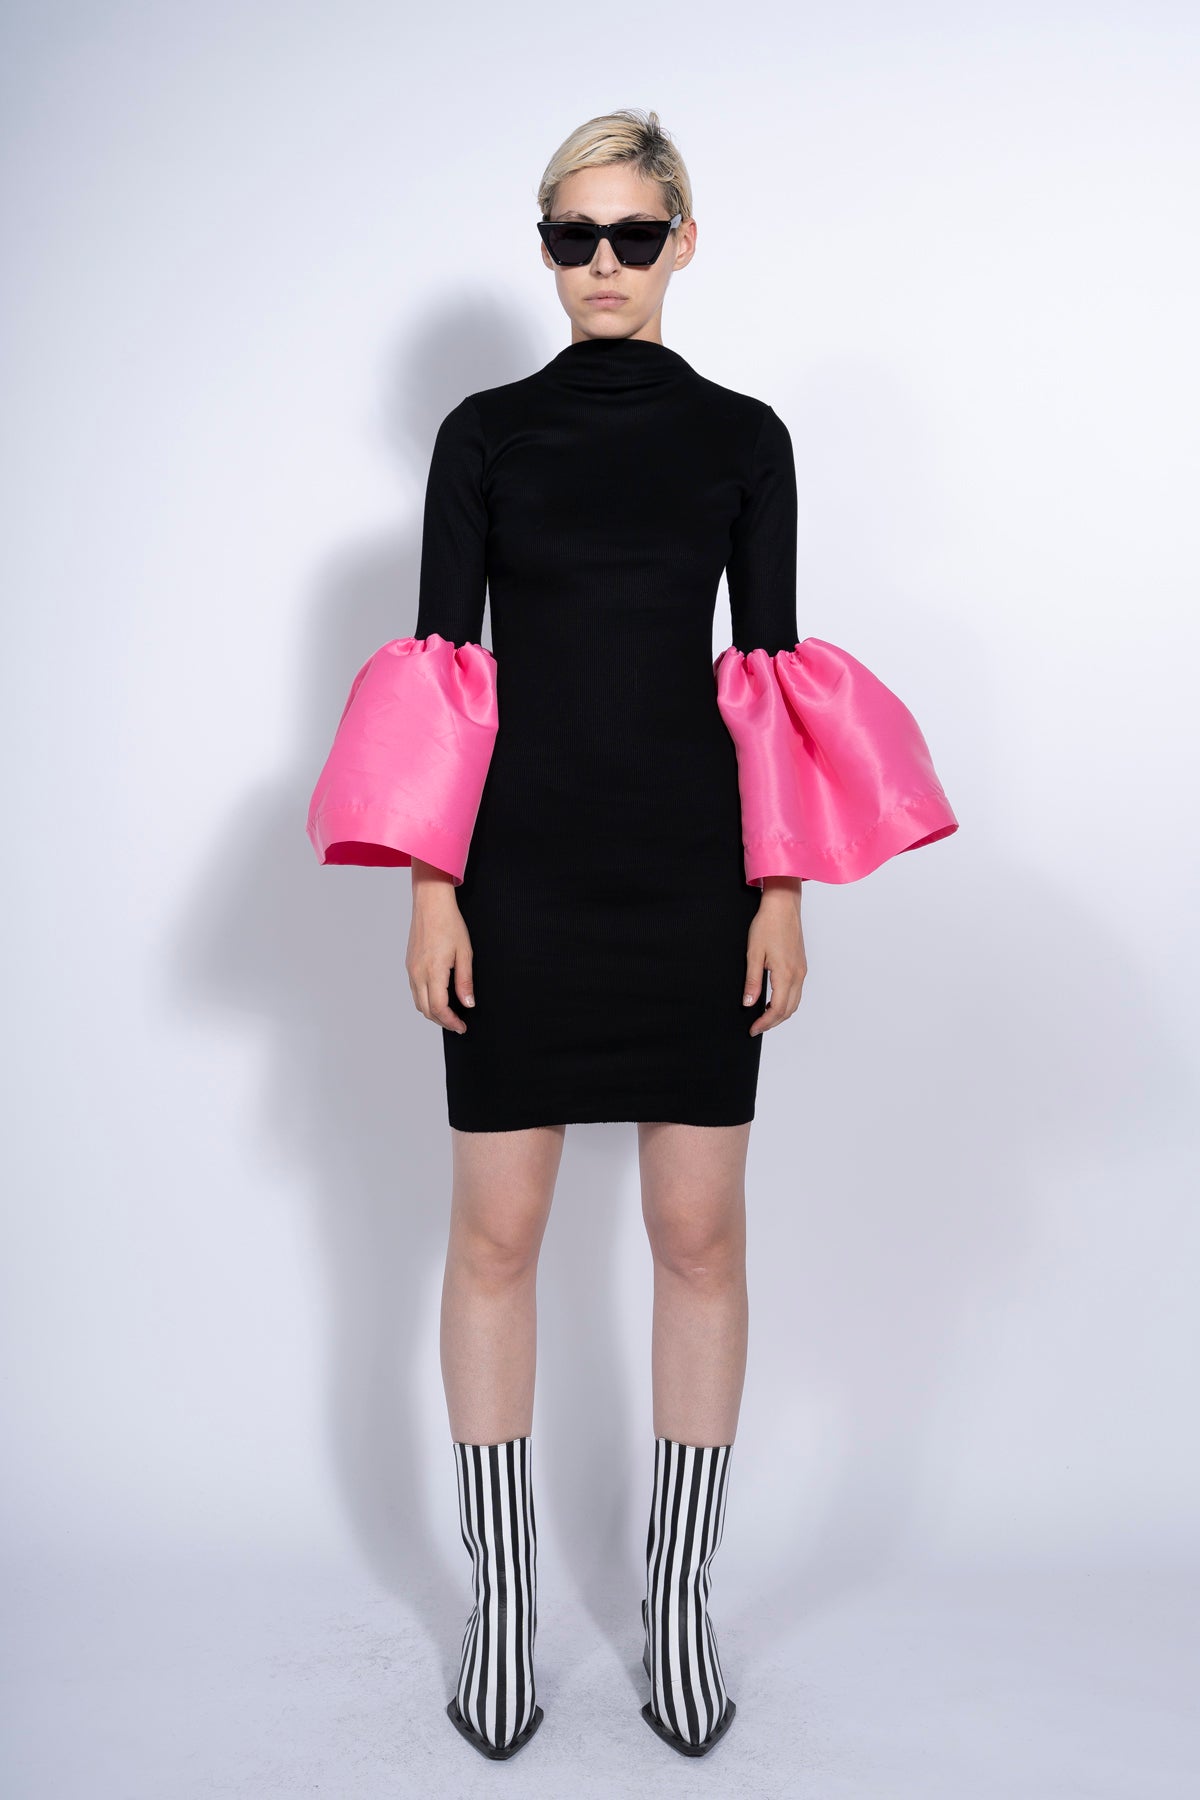 BLACK AND PINK RIB DRESS WITH PUFF SLEEVES marques almeida